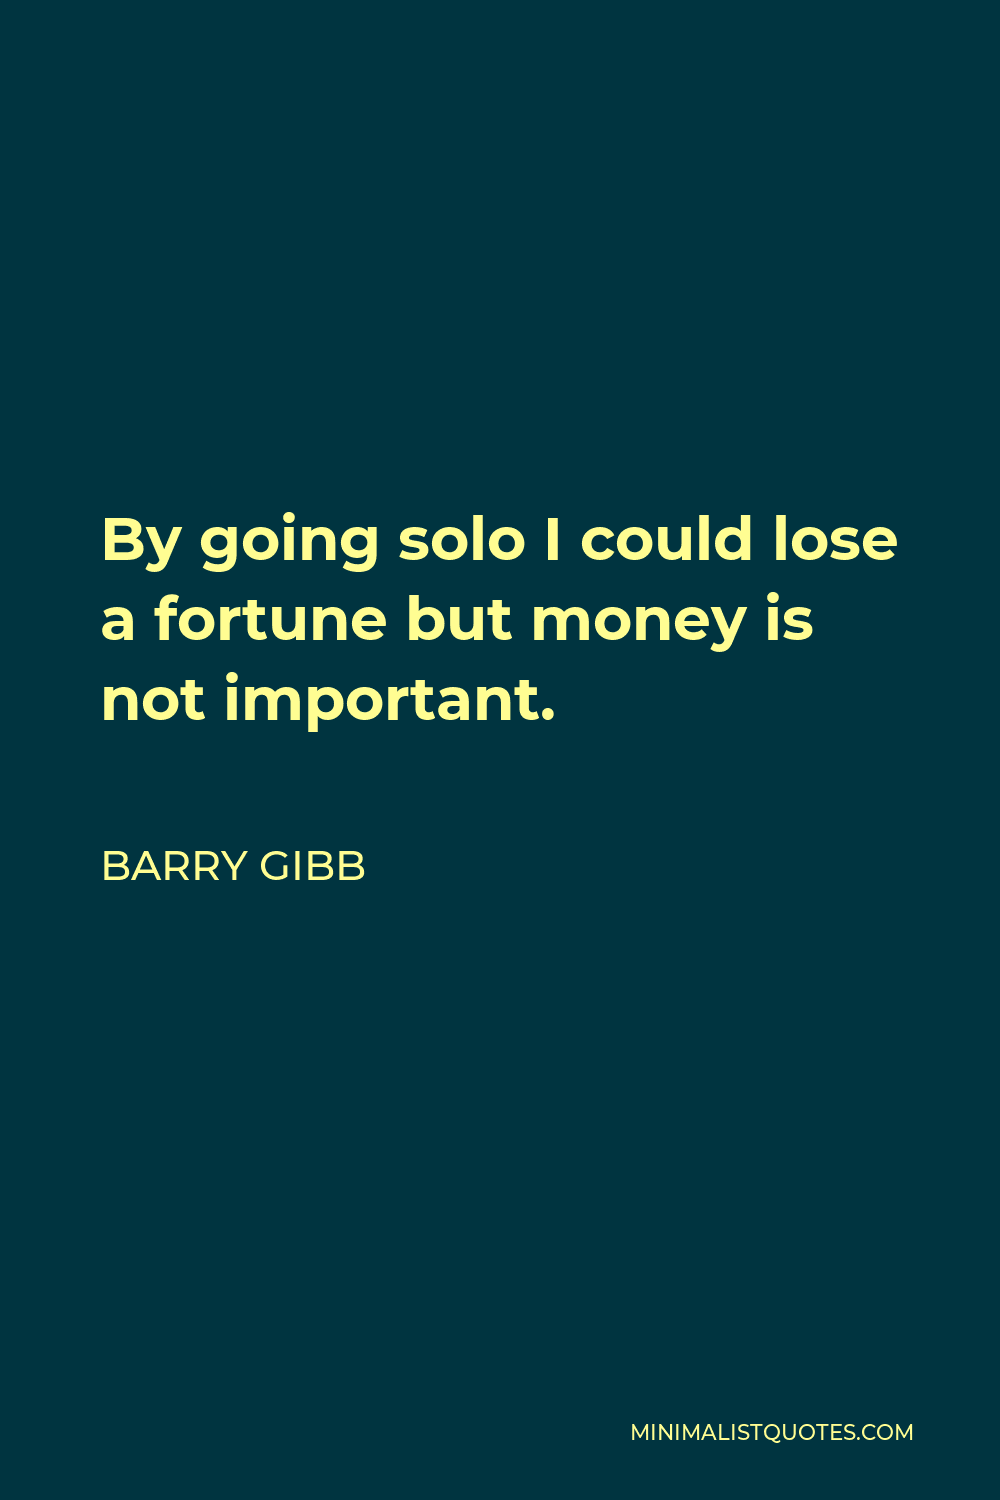 Barry Gibb Quote - By going solo I could lose a fortune but money is not important.